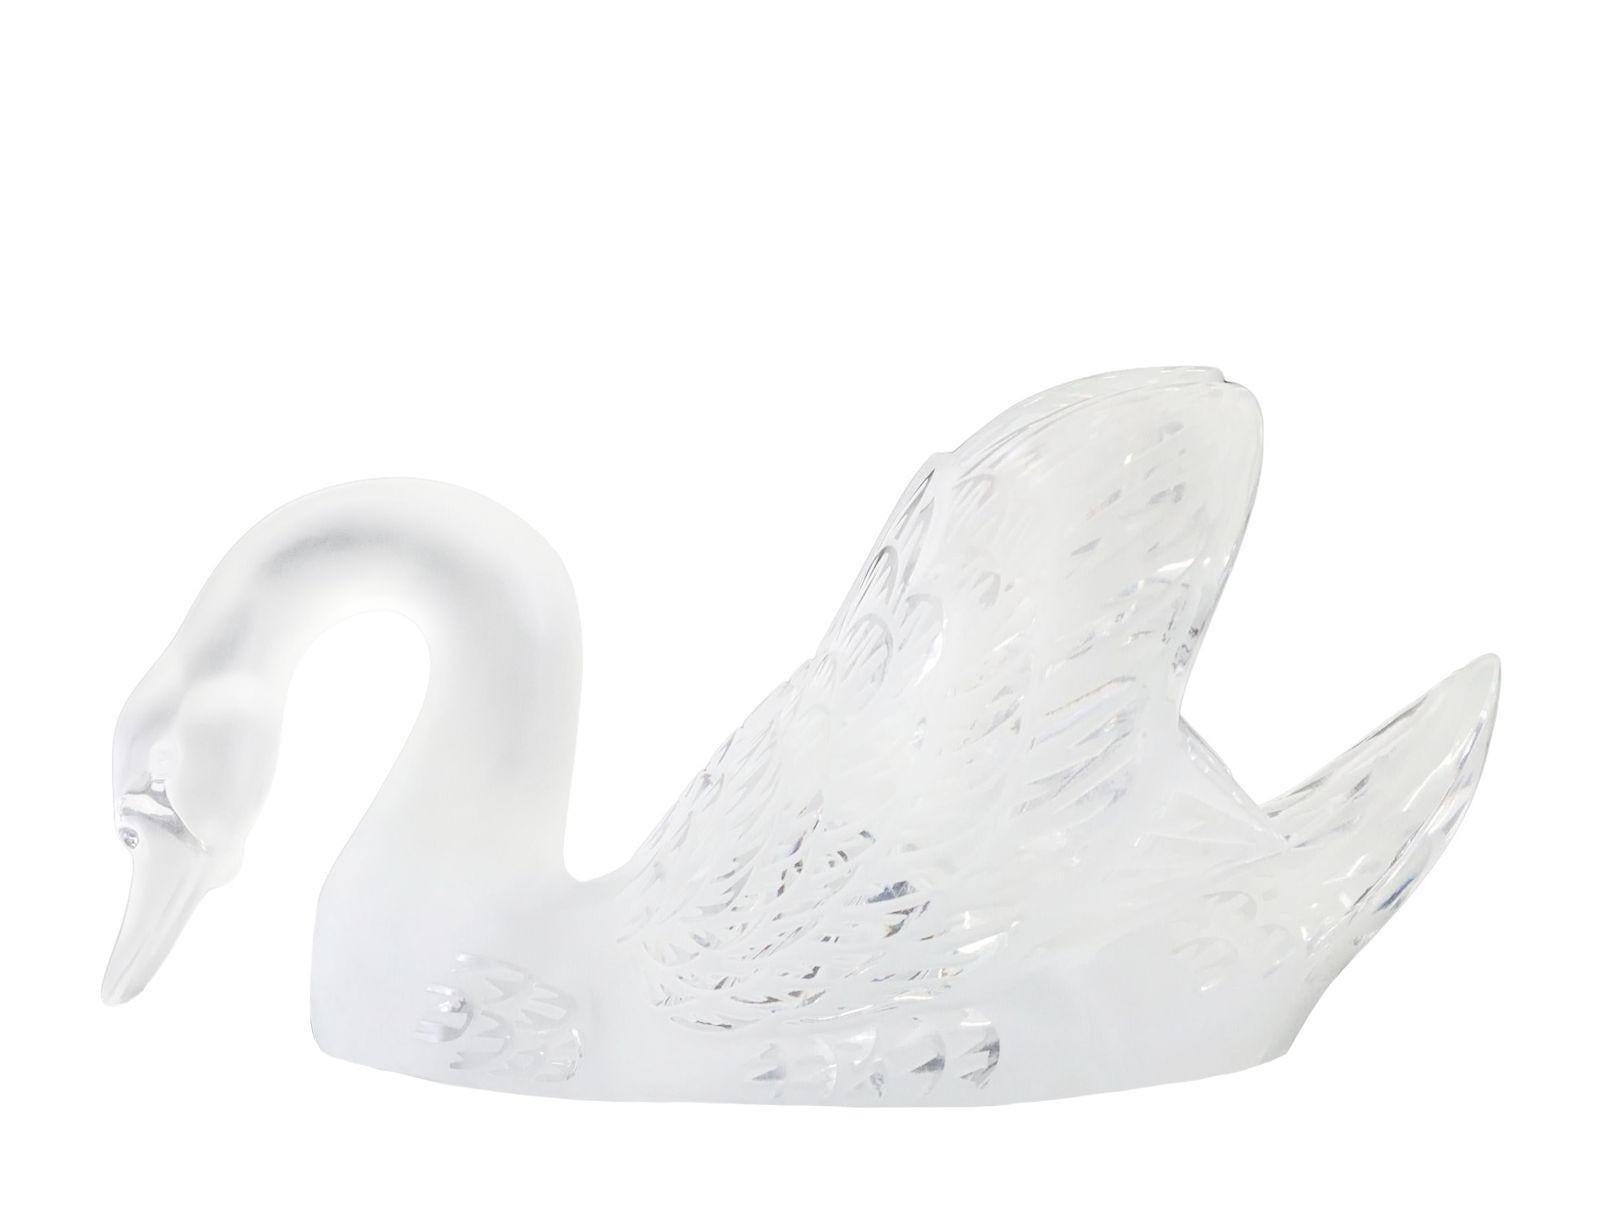 Elegant pair of frosted glass centerpiece swan figures made by Lalique made in France during the 21st century.
Each swan features a delicate frosted glass finish, adding an elegant touch to any interior setting. The base of each figure is engraved